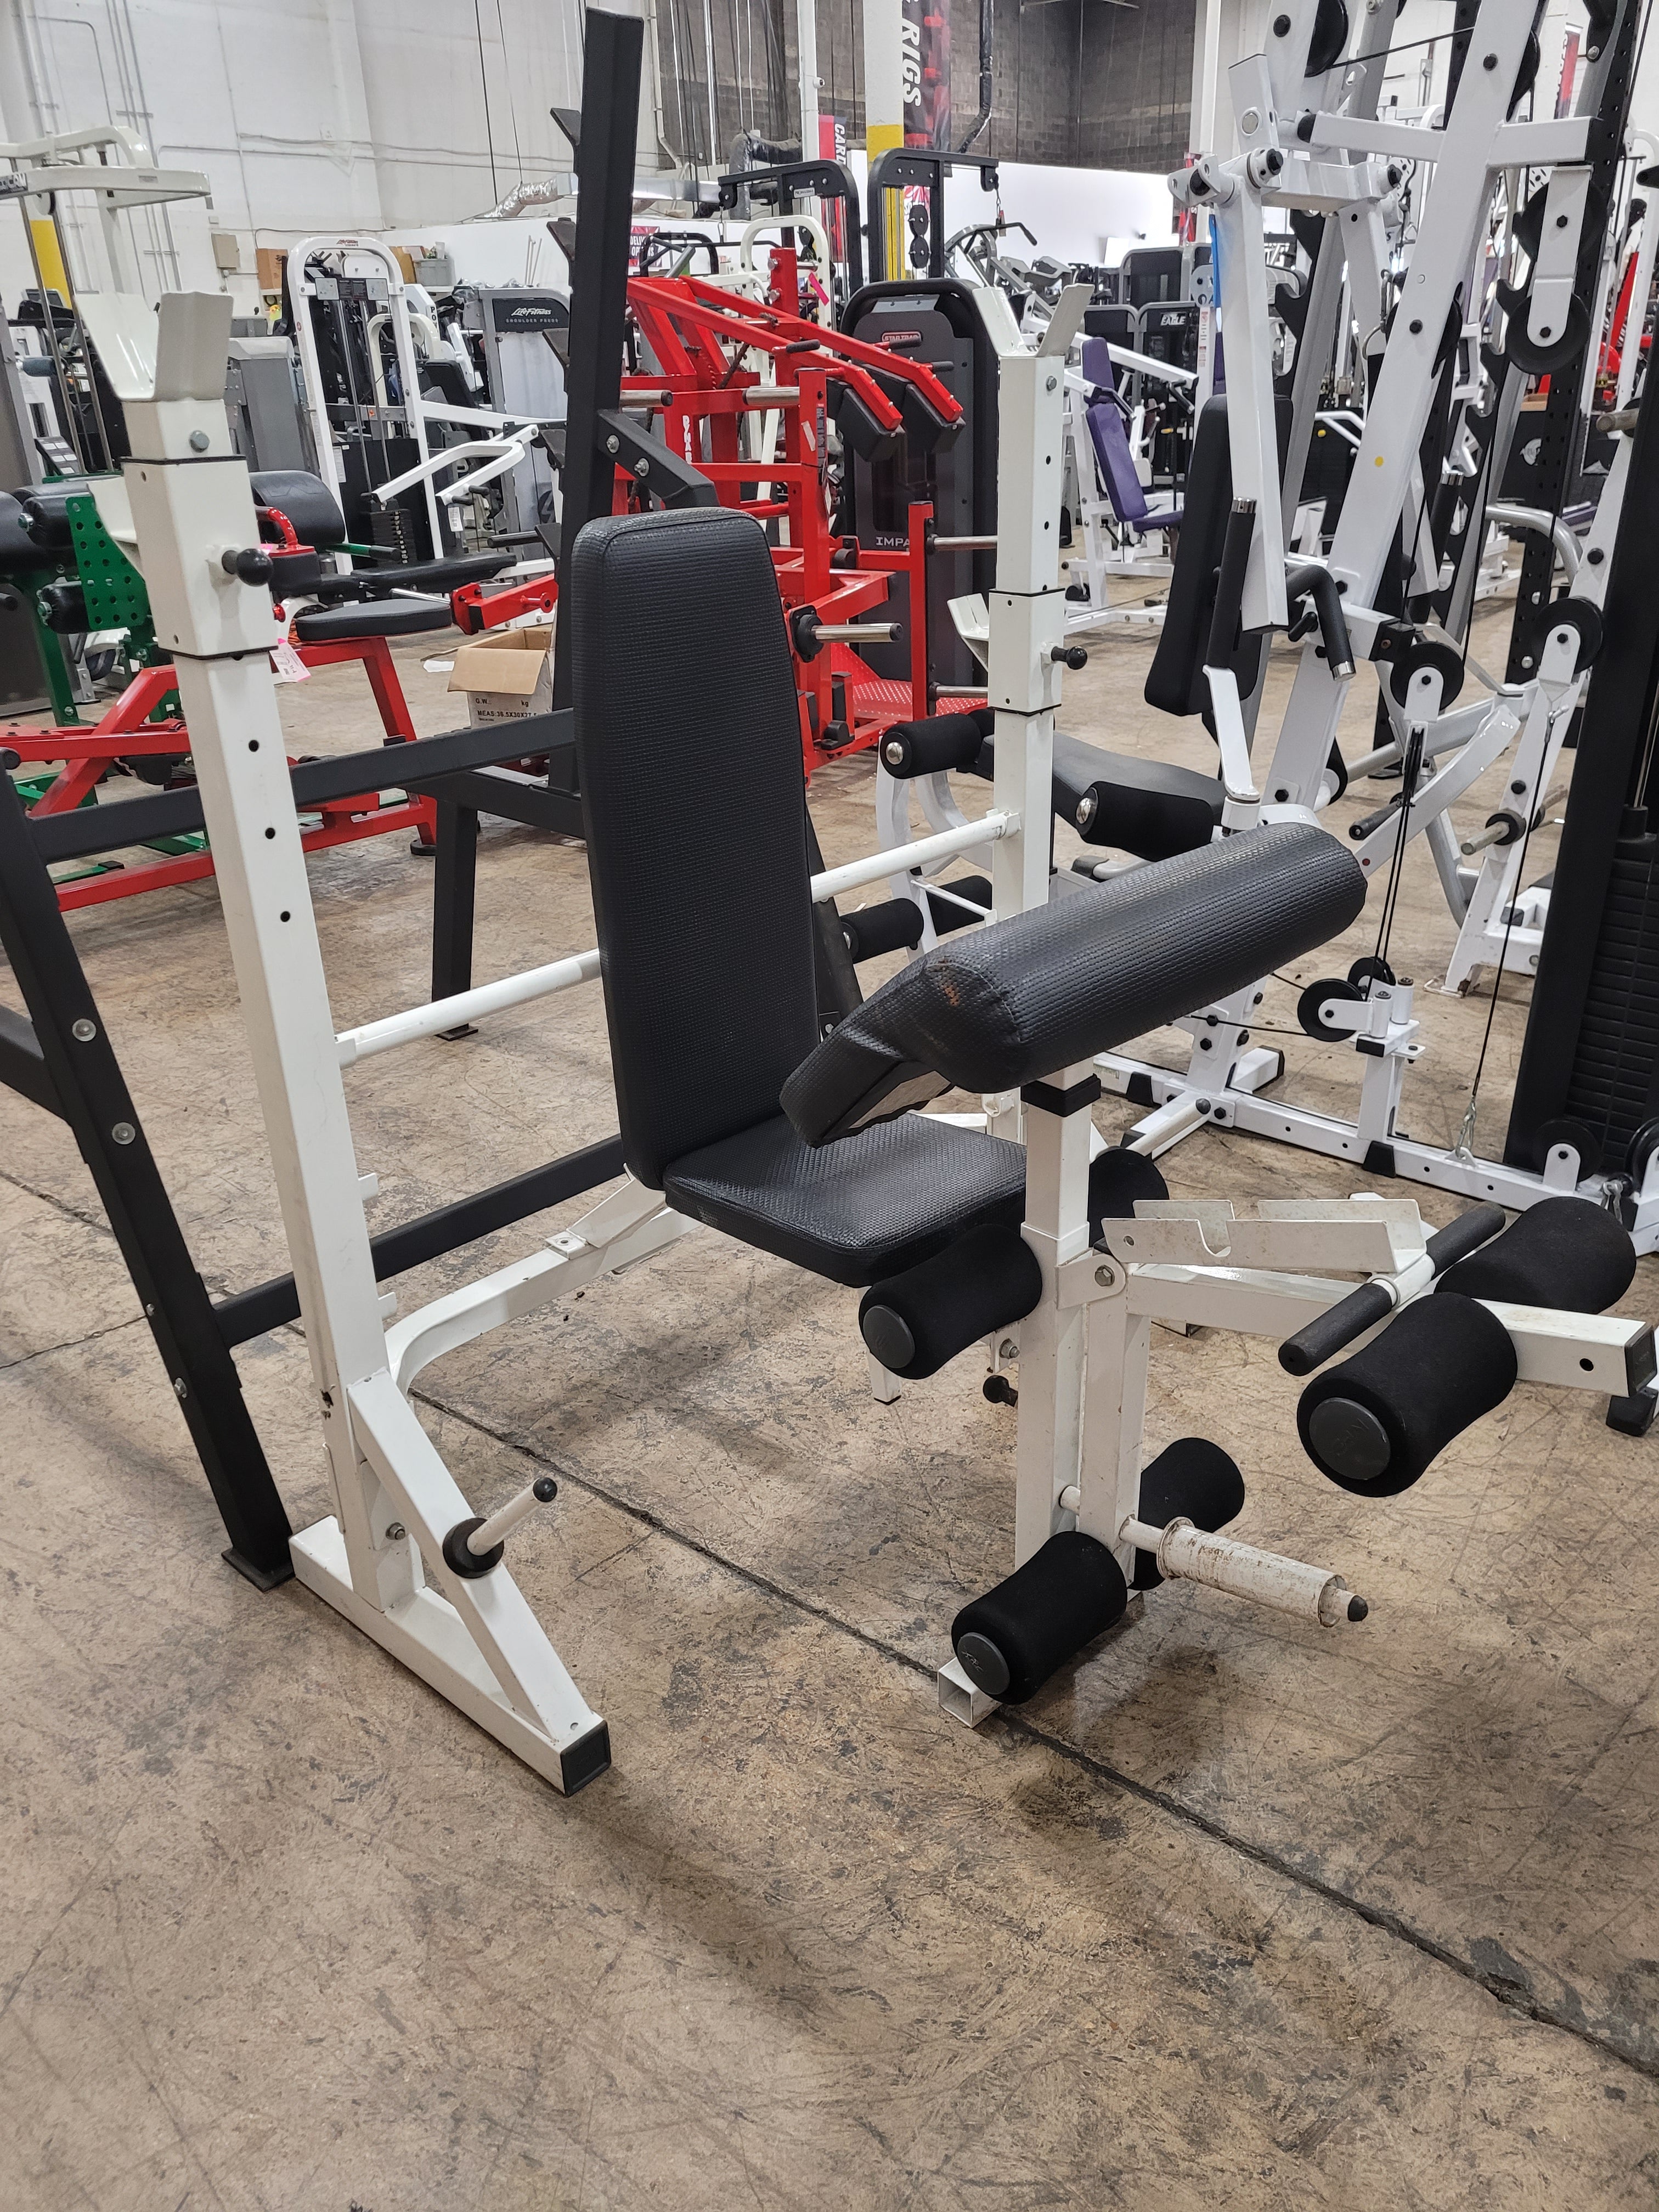 Show Me Weights, Adjustable Bench with Uprights, Preacher Curl and Leg Ext Attachments - Used